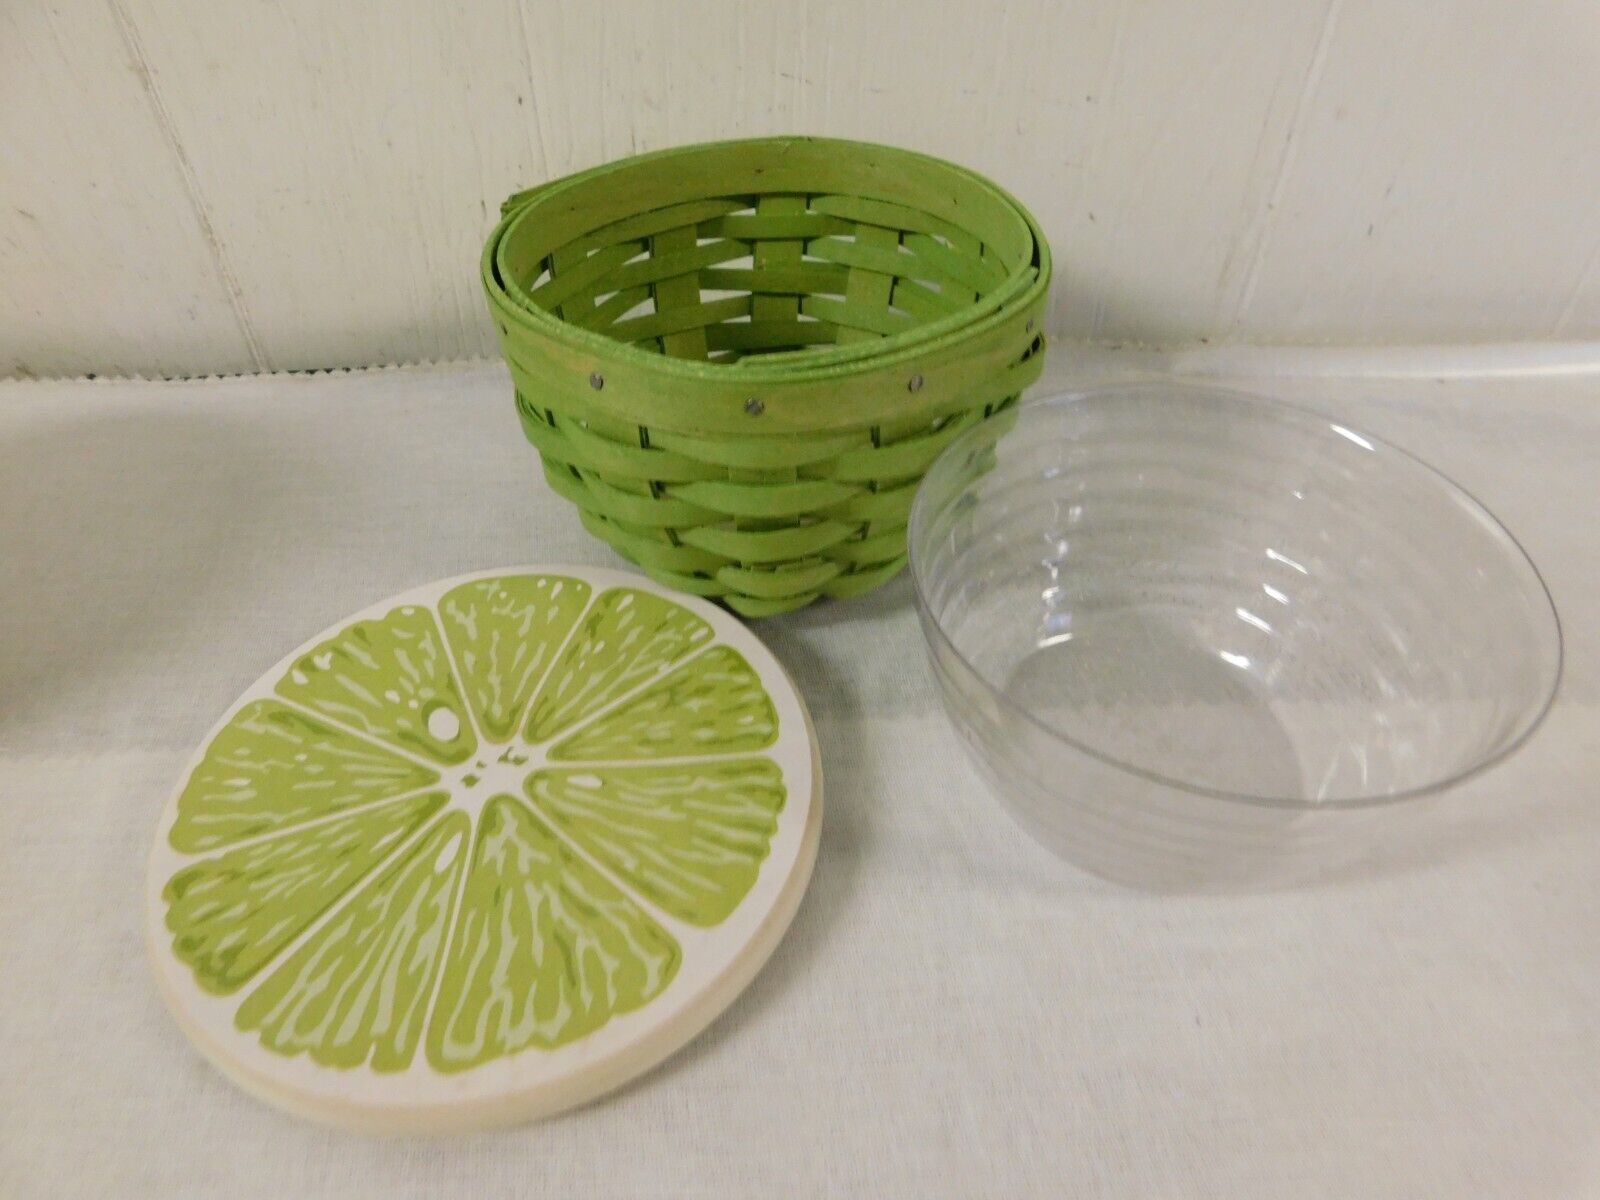 Longaberger 2010 Lime Basket with Wooden Lid & Protector